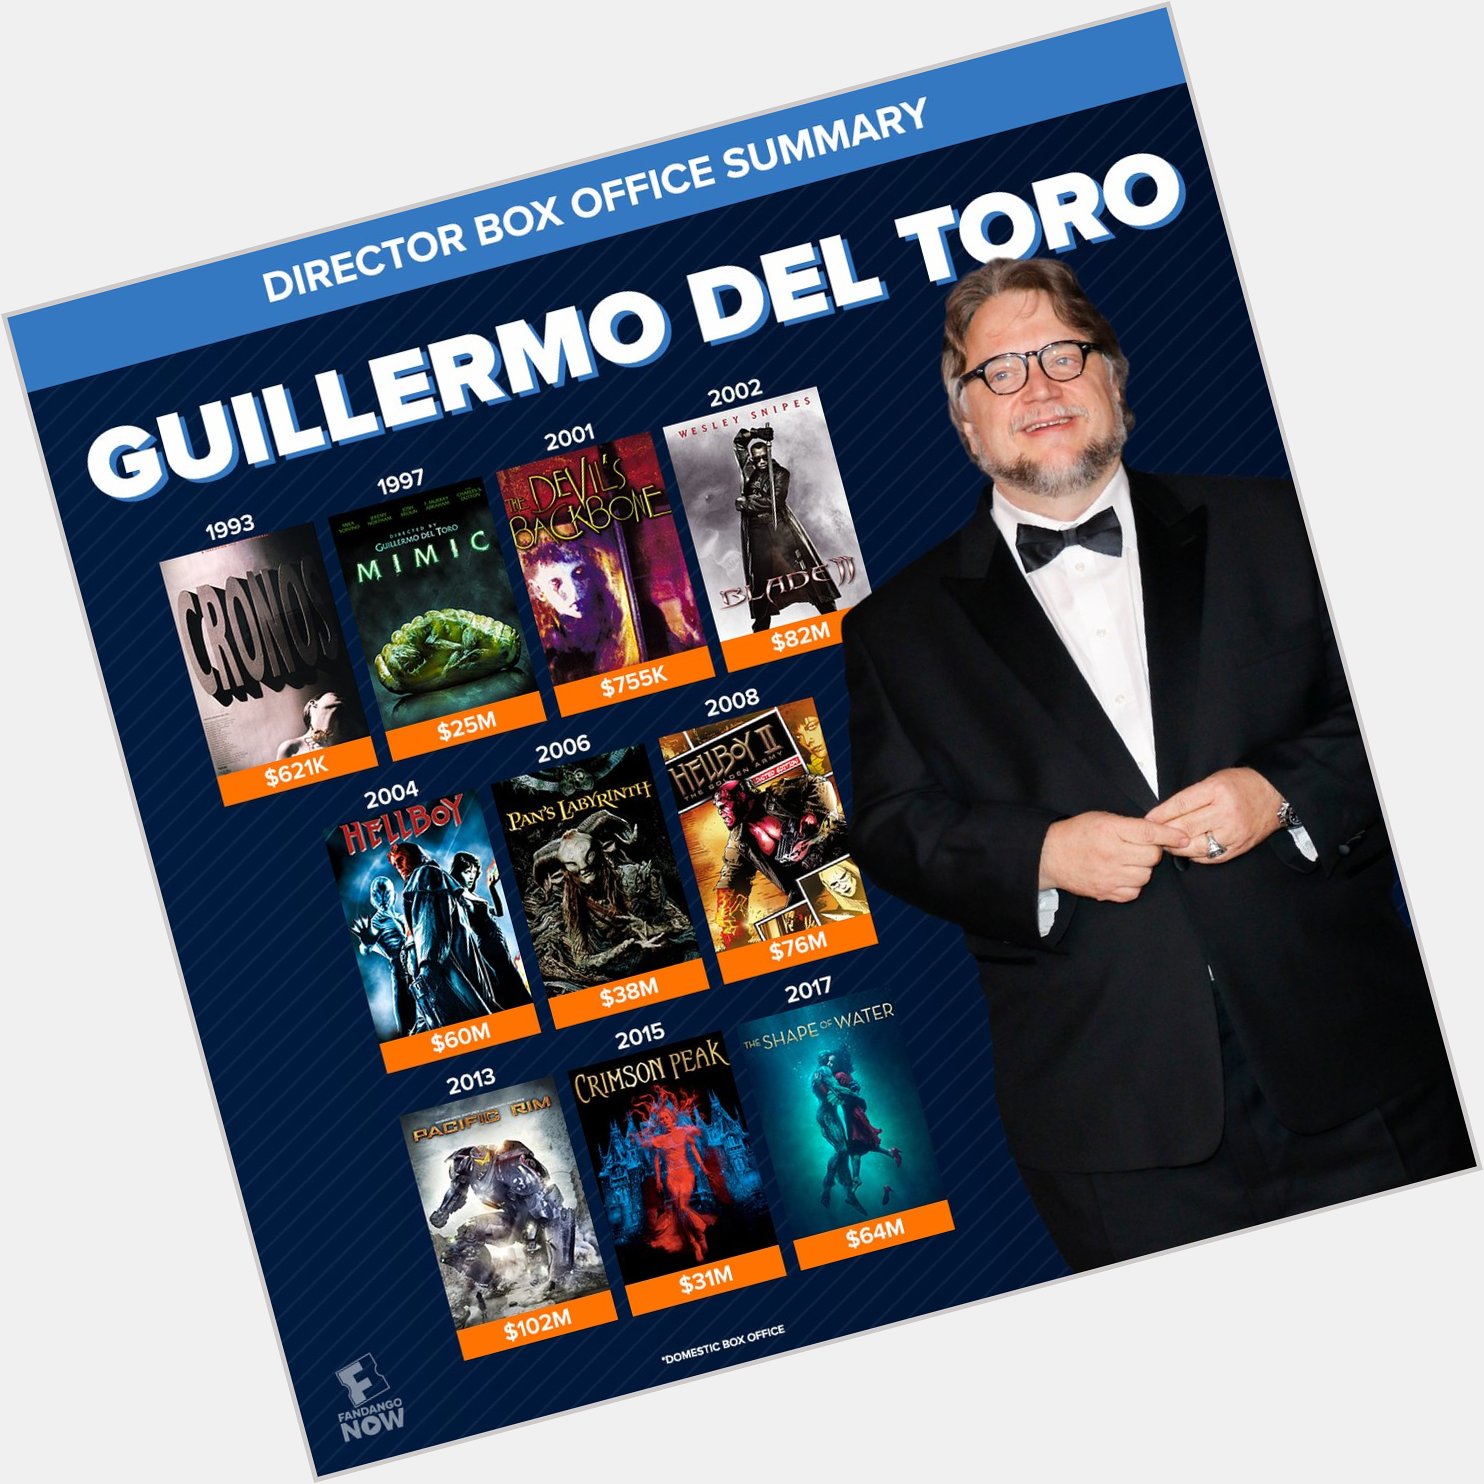 Happy birthday, Guillermo del Toro! Which is your favorite of his films? 